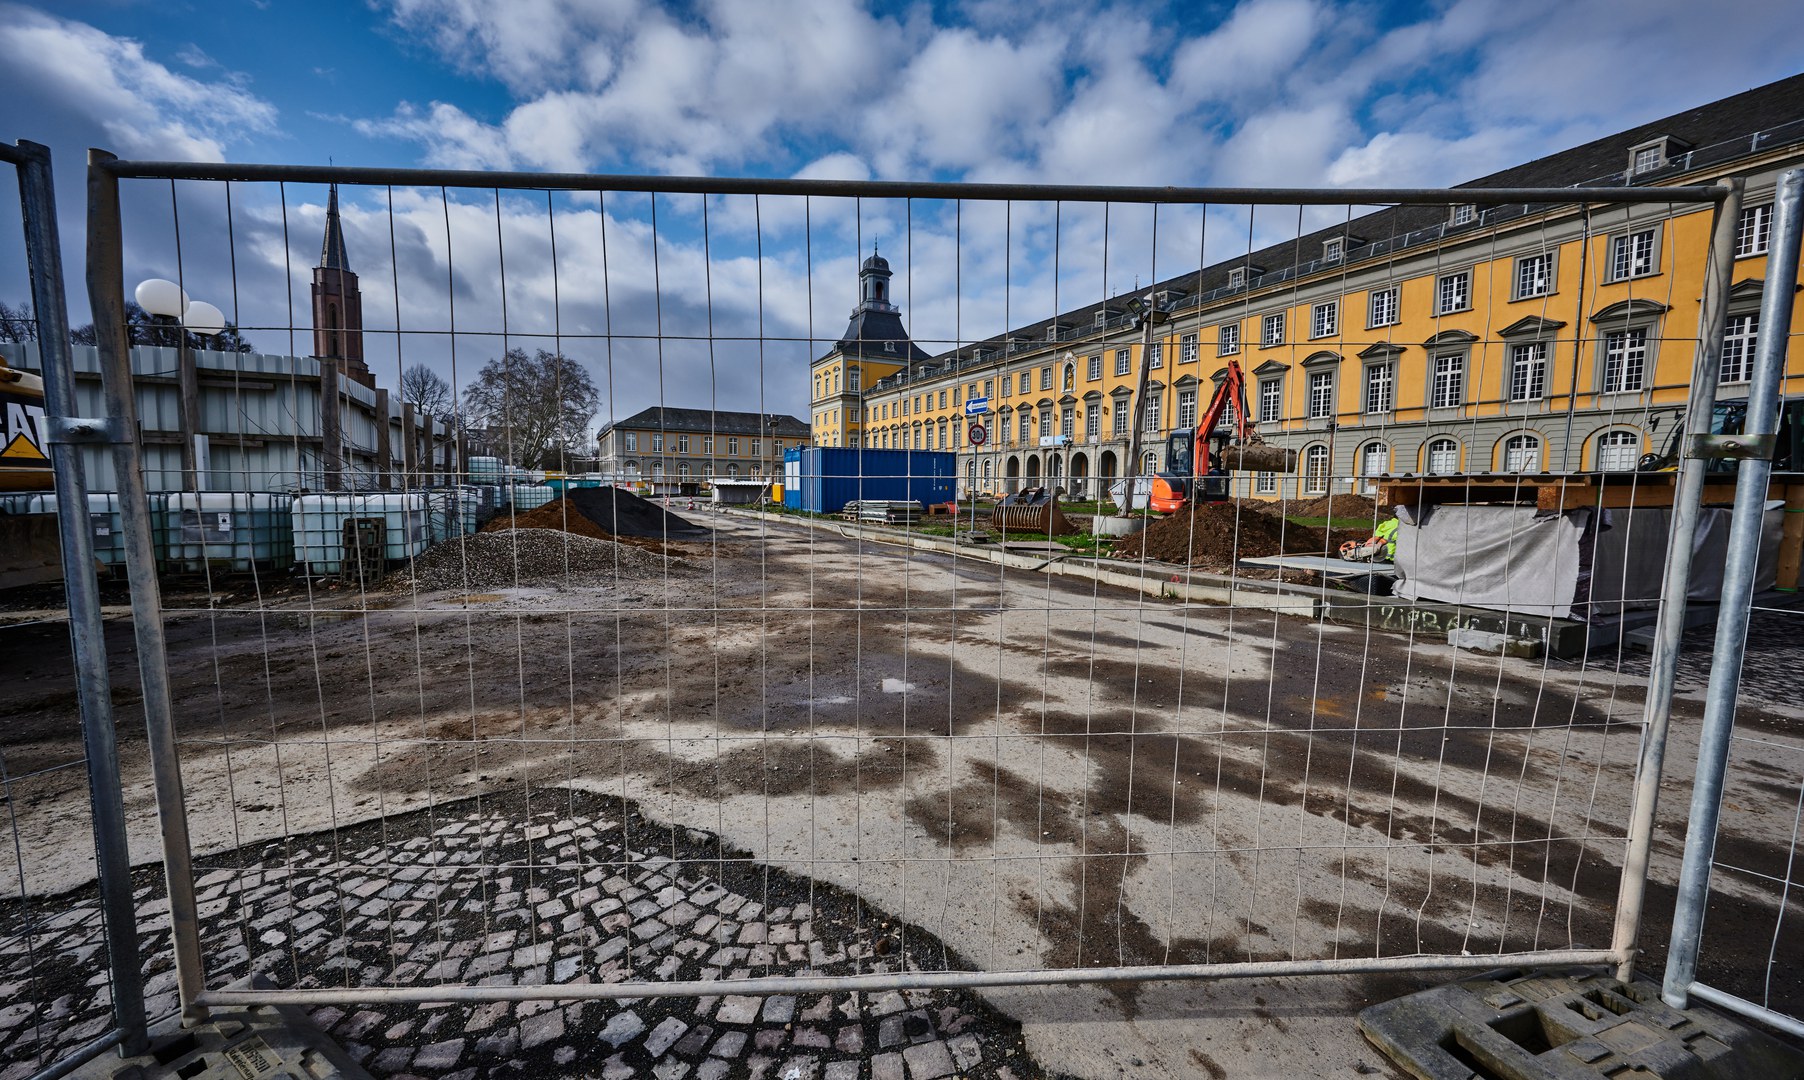 Construction work at the University's main building